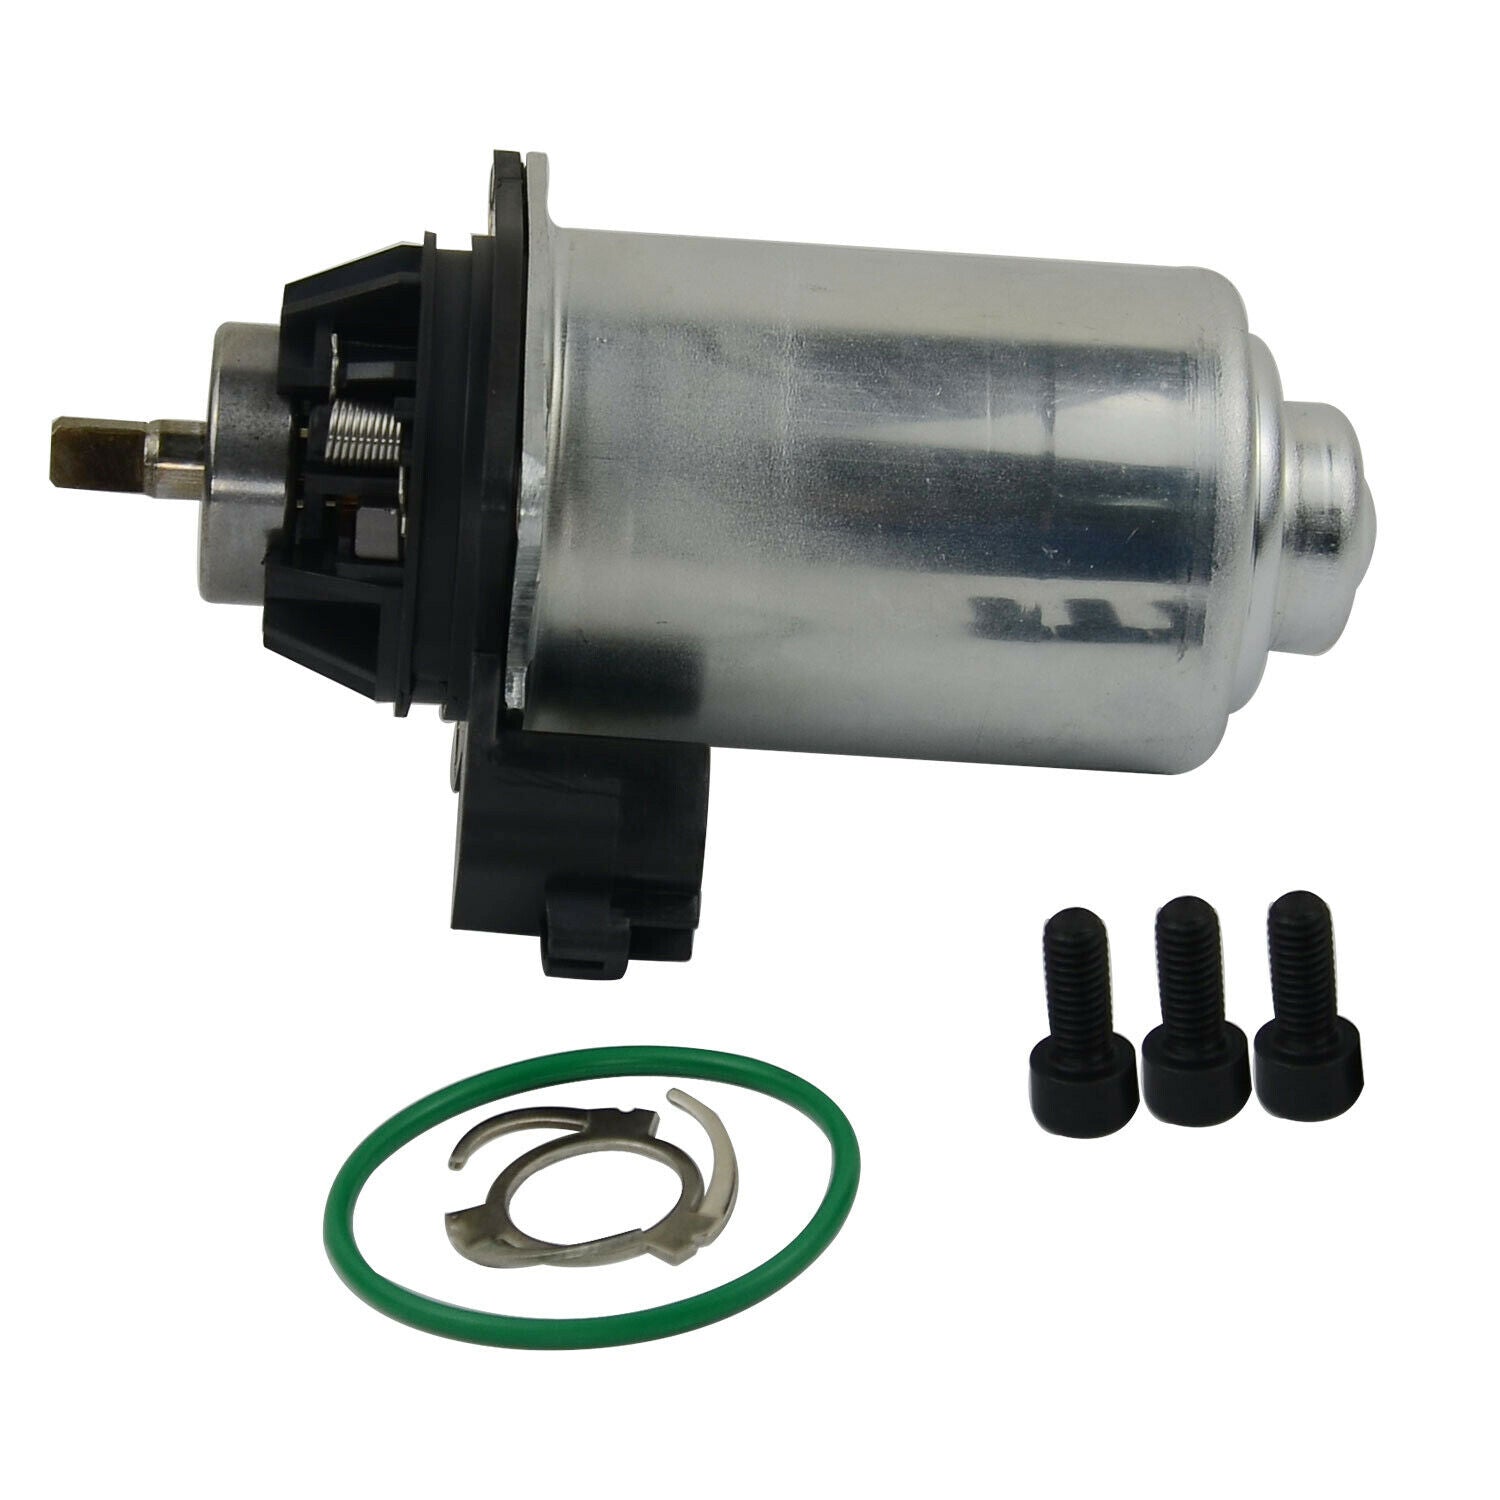 BRAND NEW CLUTCH FRICTION ACTUATOR MOTOR FOR TOYOTA AURIS AND COROLLA